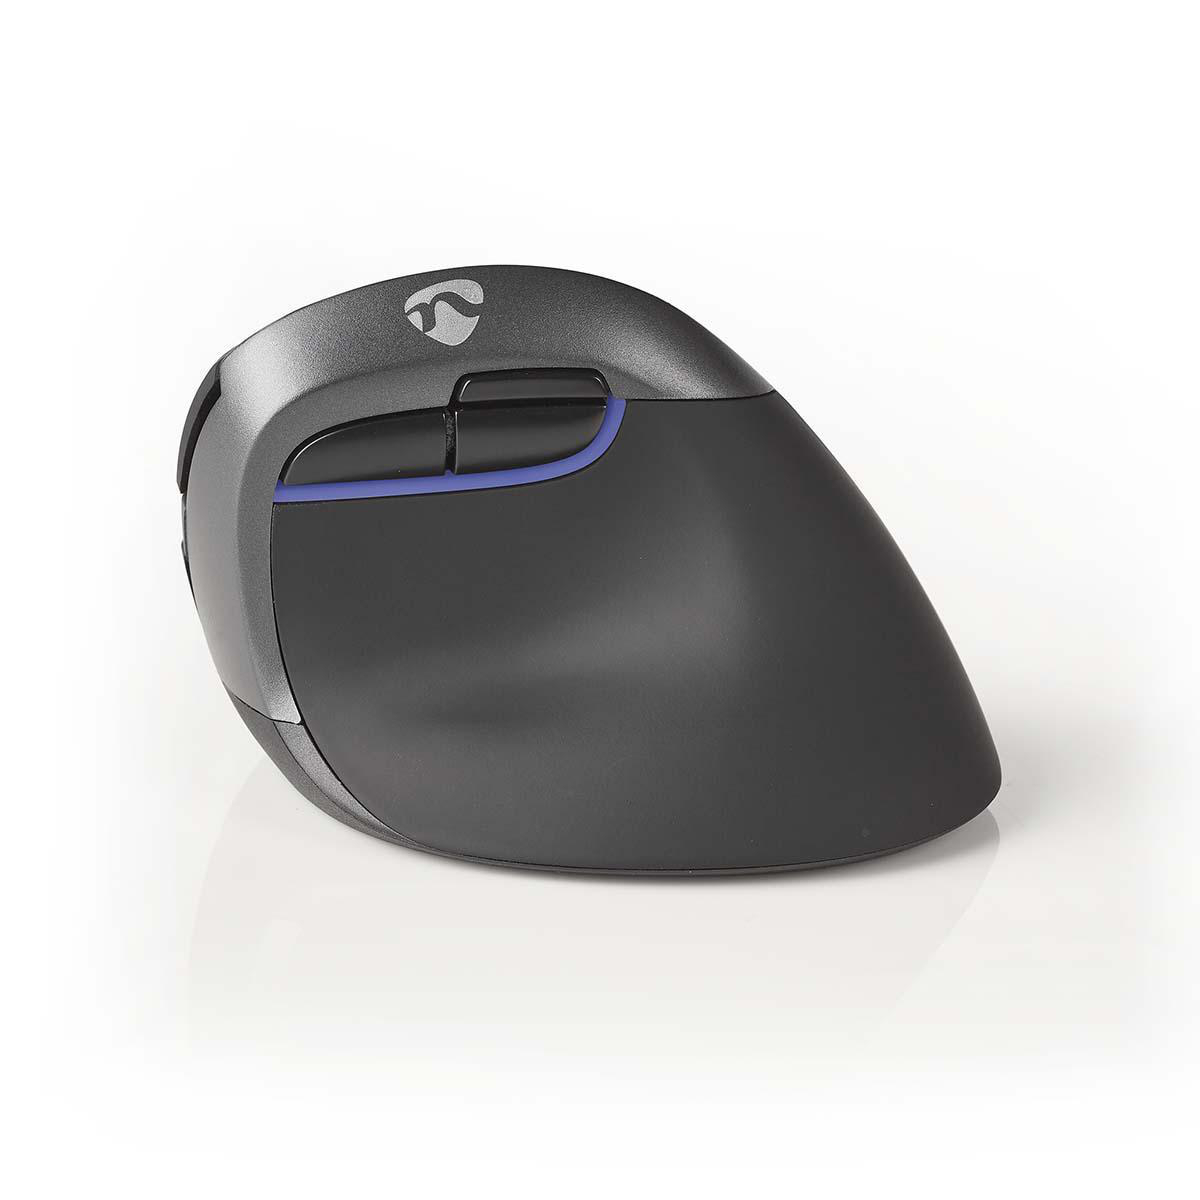 Nedis Wireless Mouse 800-1600dpi – 6 Buttons – Optical